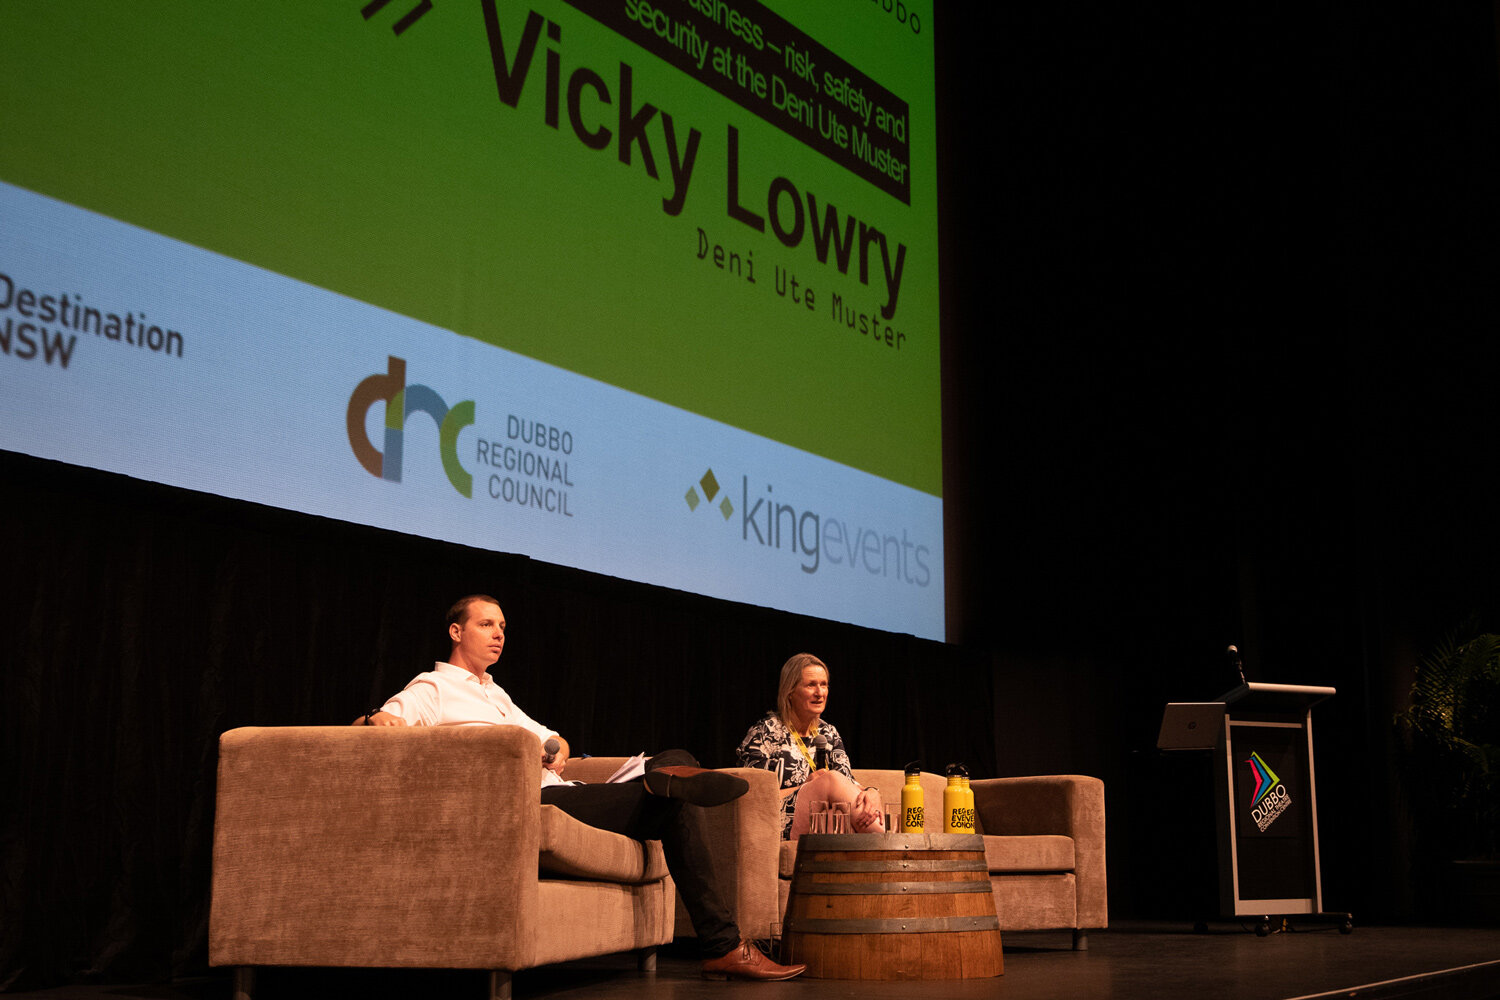 Phil-Wishart-and-Vicky-Lowry-at-Regional-Events-Conference-in-Dubbo.jpg